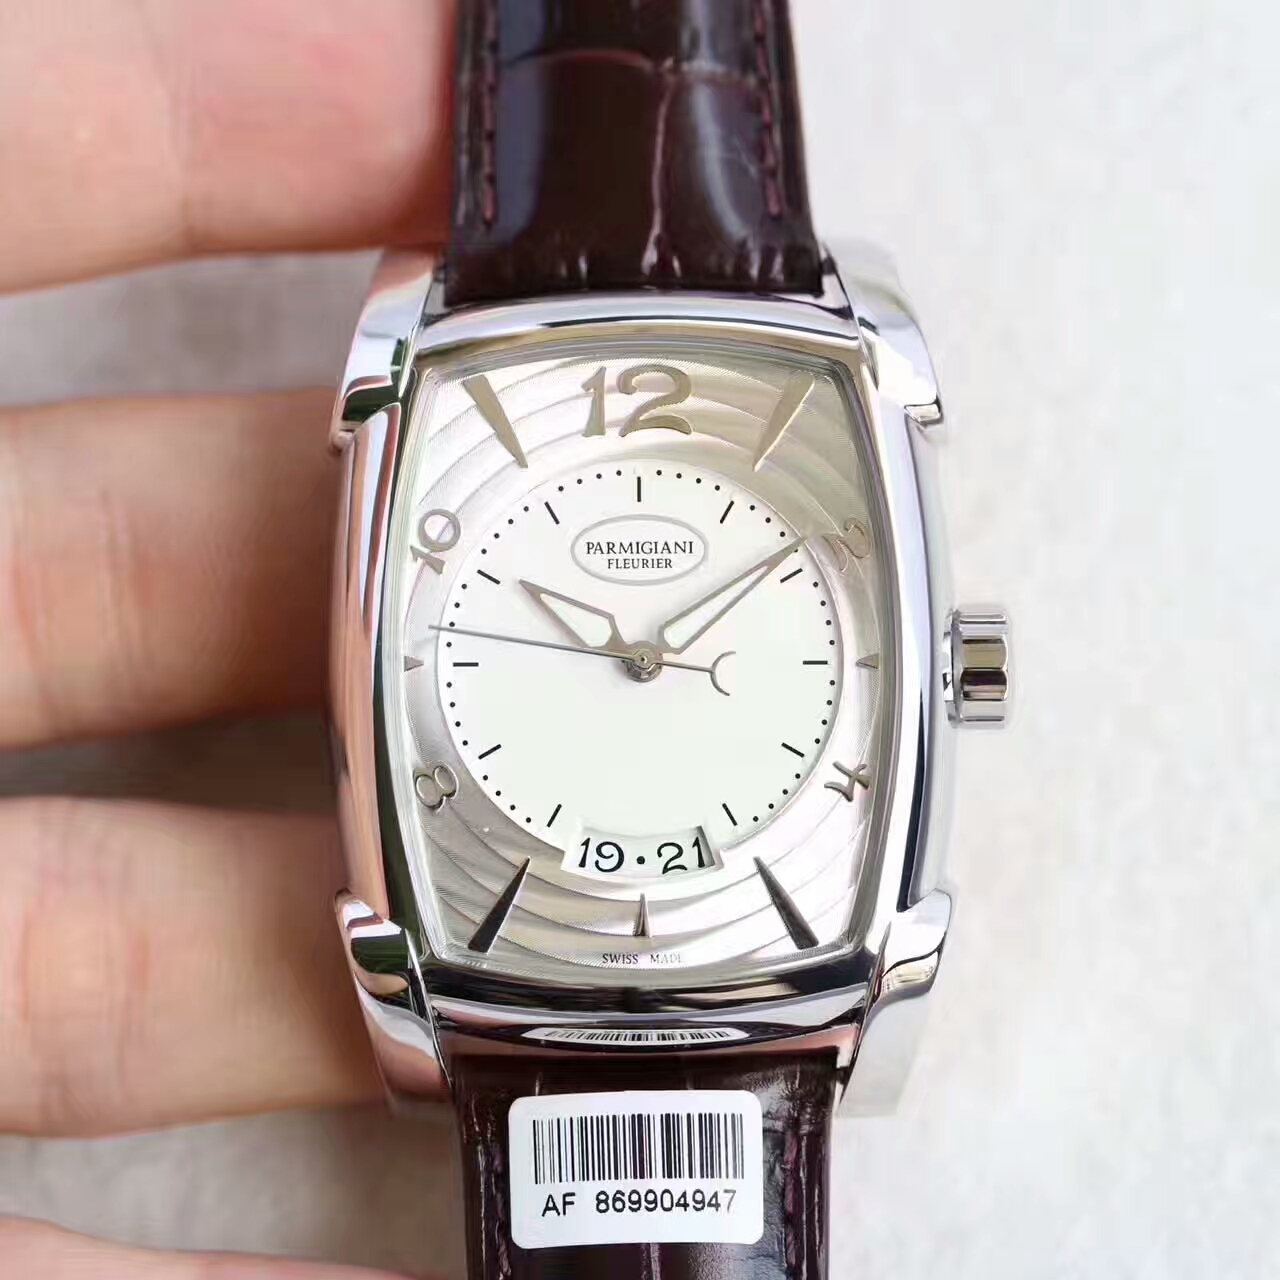 Hot new sales artifact [Highest quality V2 version] One-to-one replica watches Parmigiani Fleurier KALPA series PF331.01 - Click Image to Close